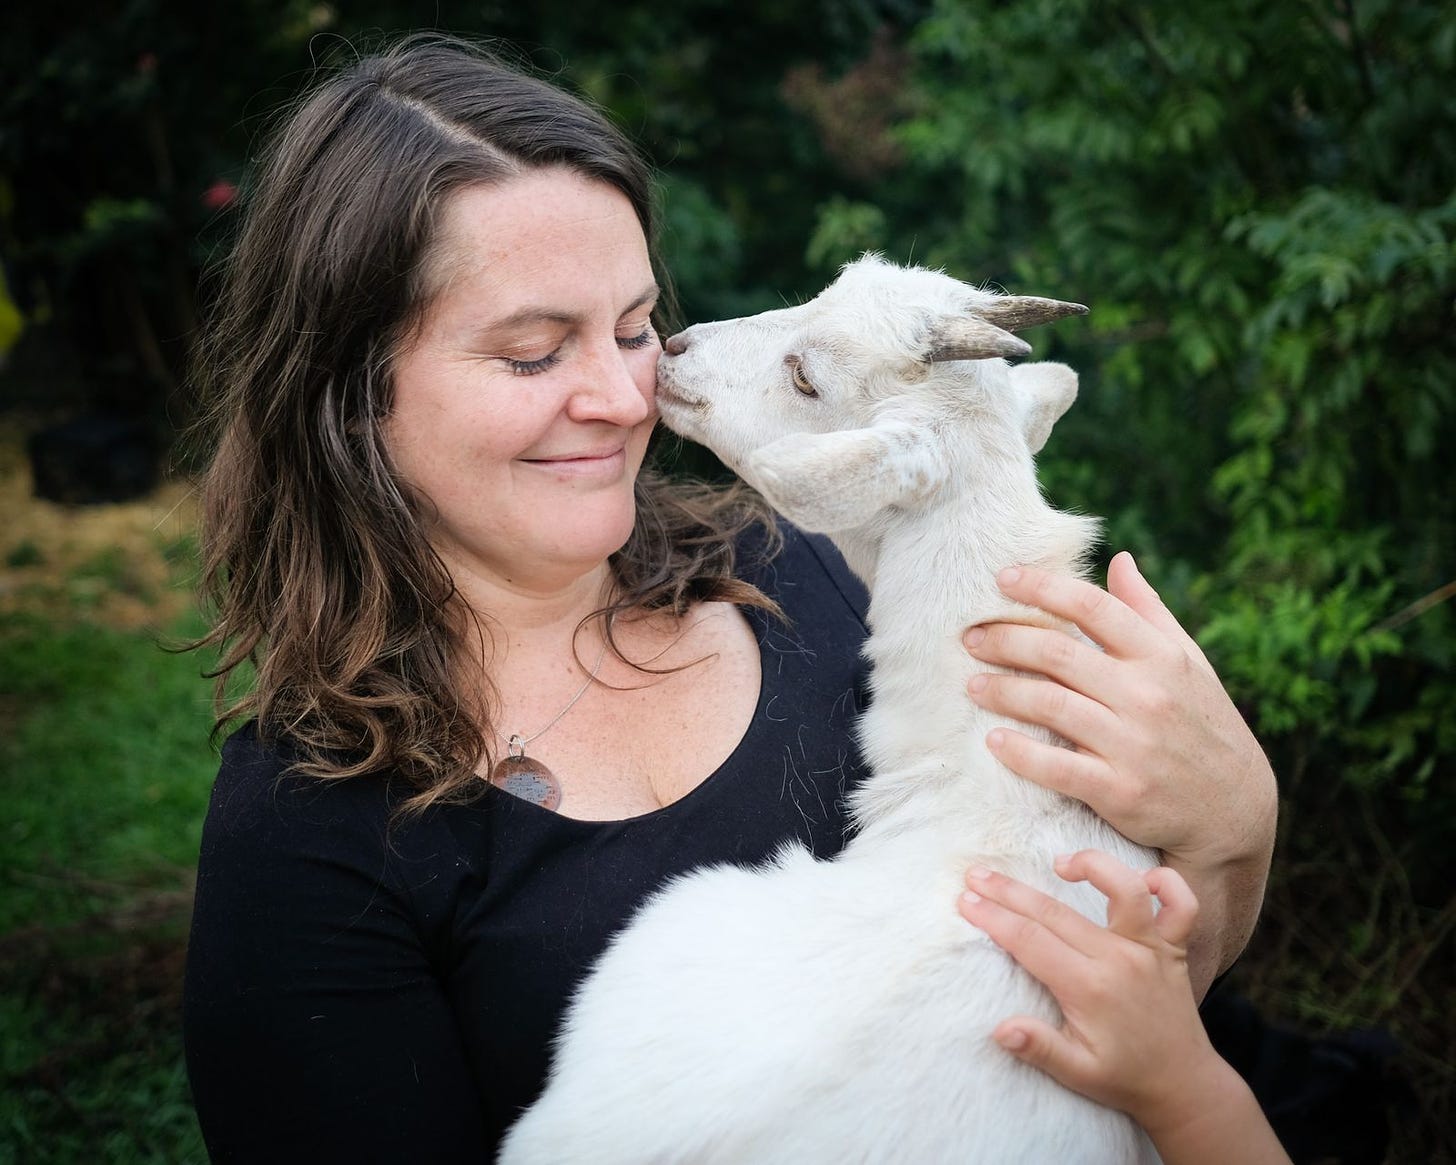 A woman stands here amid a forest scene. She is white and has brown hair, and is wearing a black shirt. It's Rachelle Barr! And her eyes are closed, and she's holding a white goat kid which is coming up to kiss her cheek. Her eyes are closed and she is smiling. Wouldn't you?